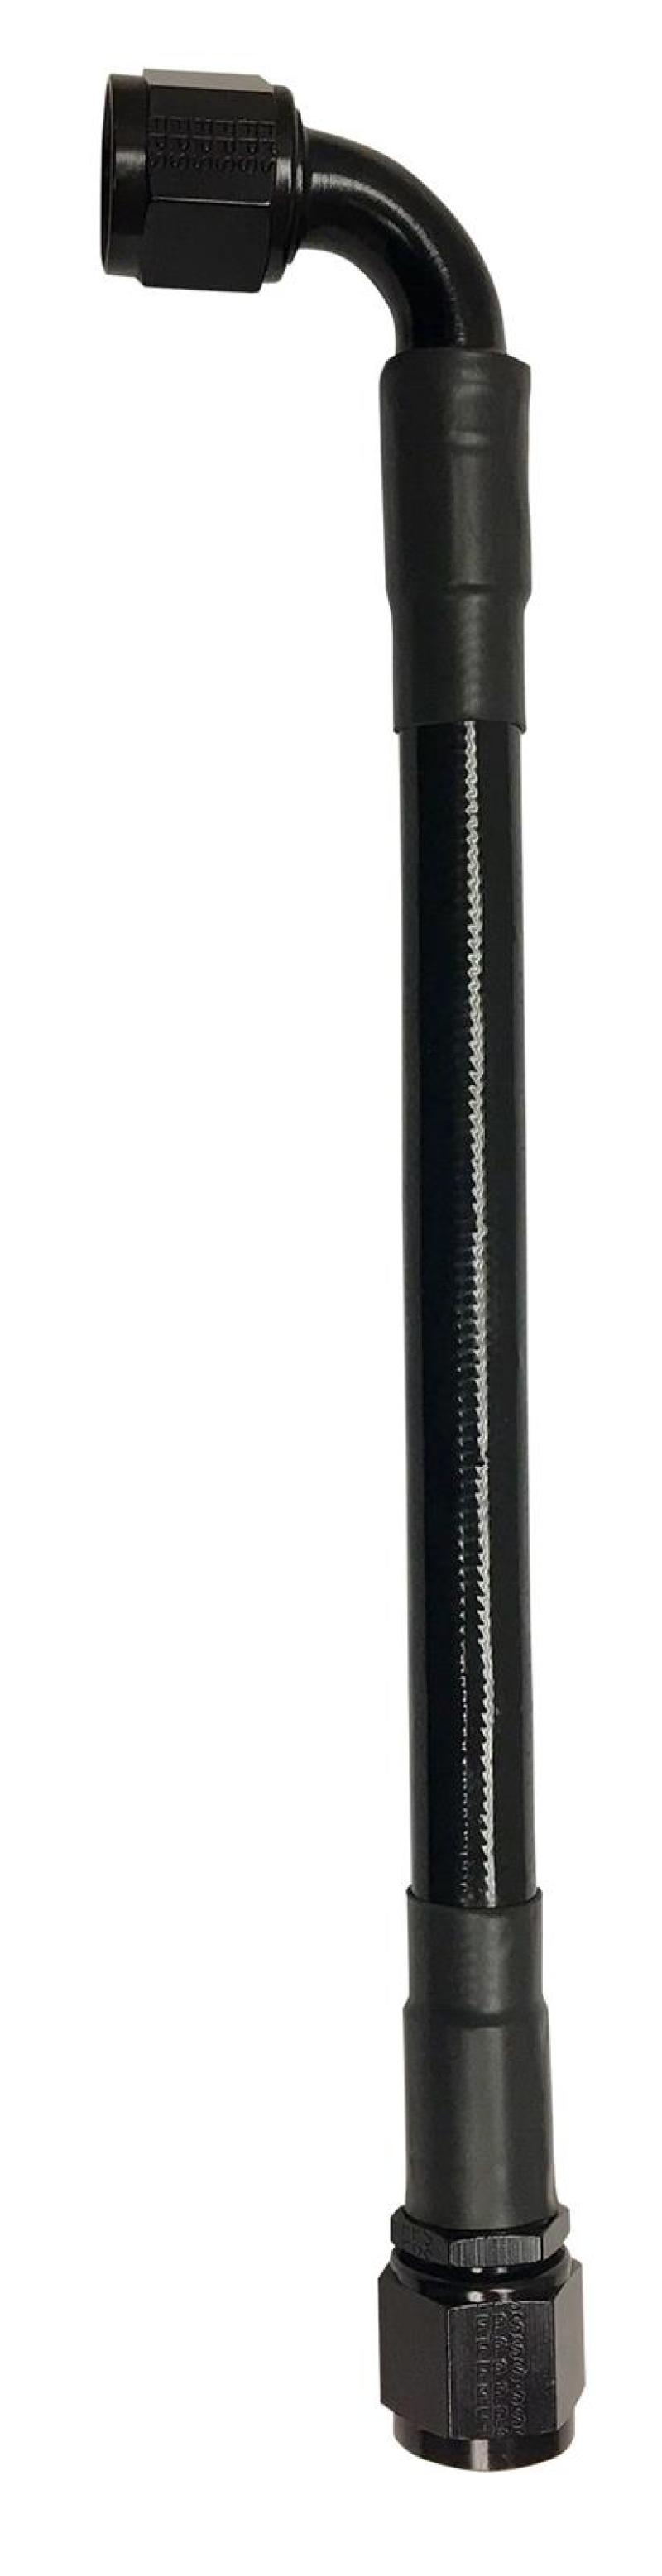 Fragola -10AN Ext Black PTFE Hose Assembly Straight x 90 Degree 96in - 6029-1-2-96BL